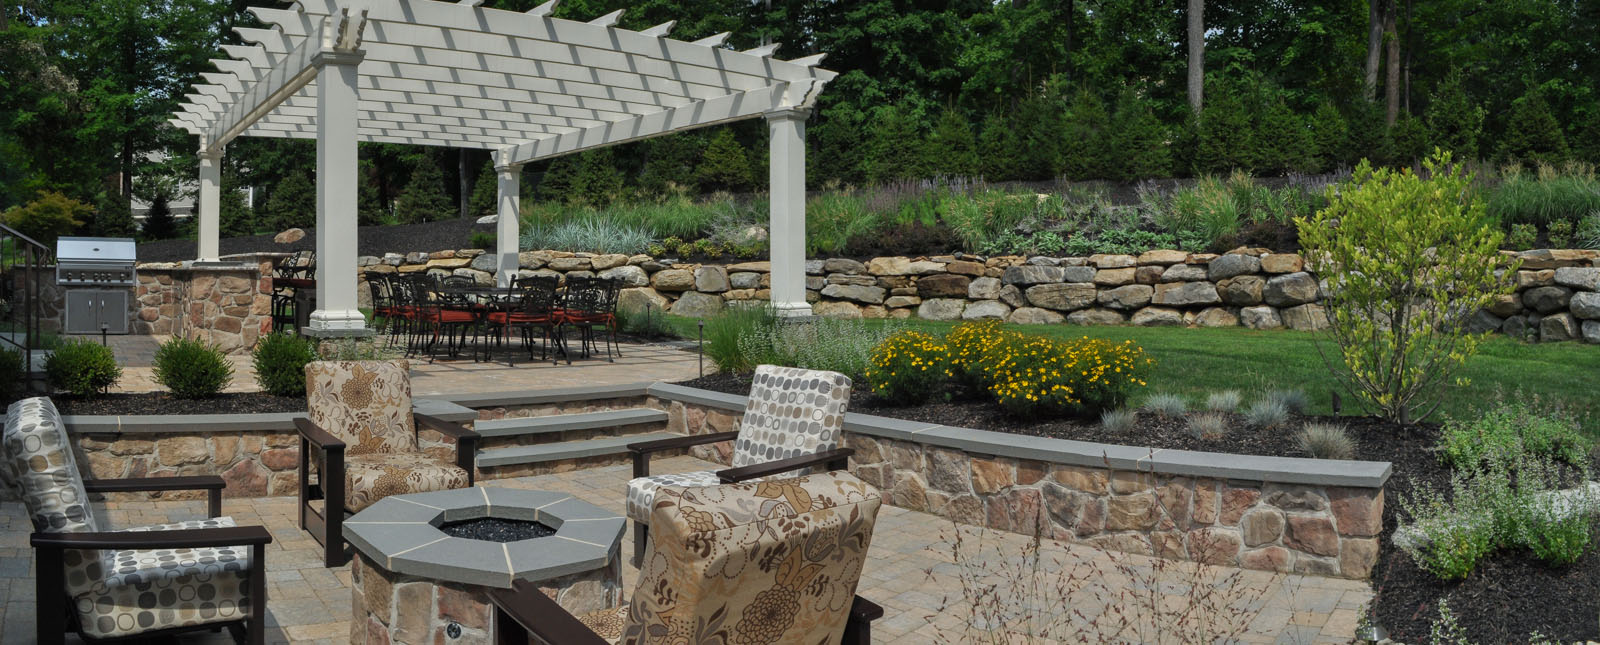 gas fire pit, seat wall, pergola, built-in bbq, landscape design - new jersey